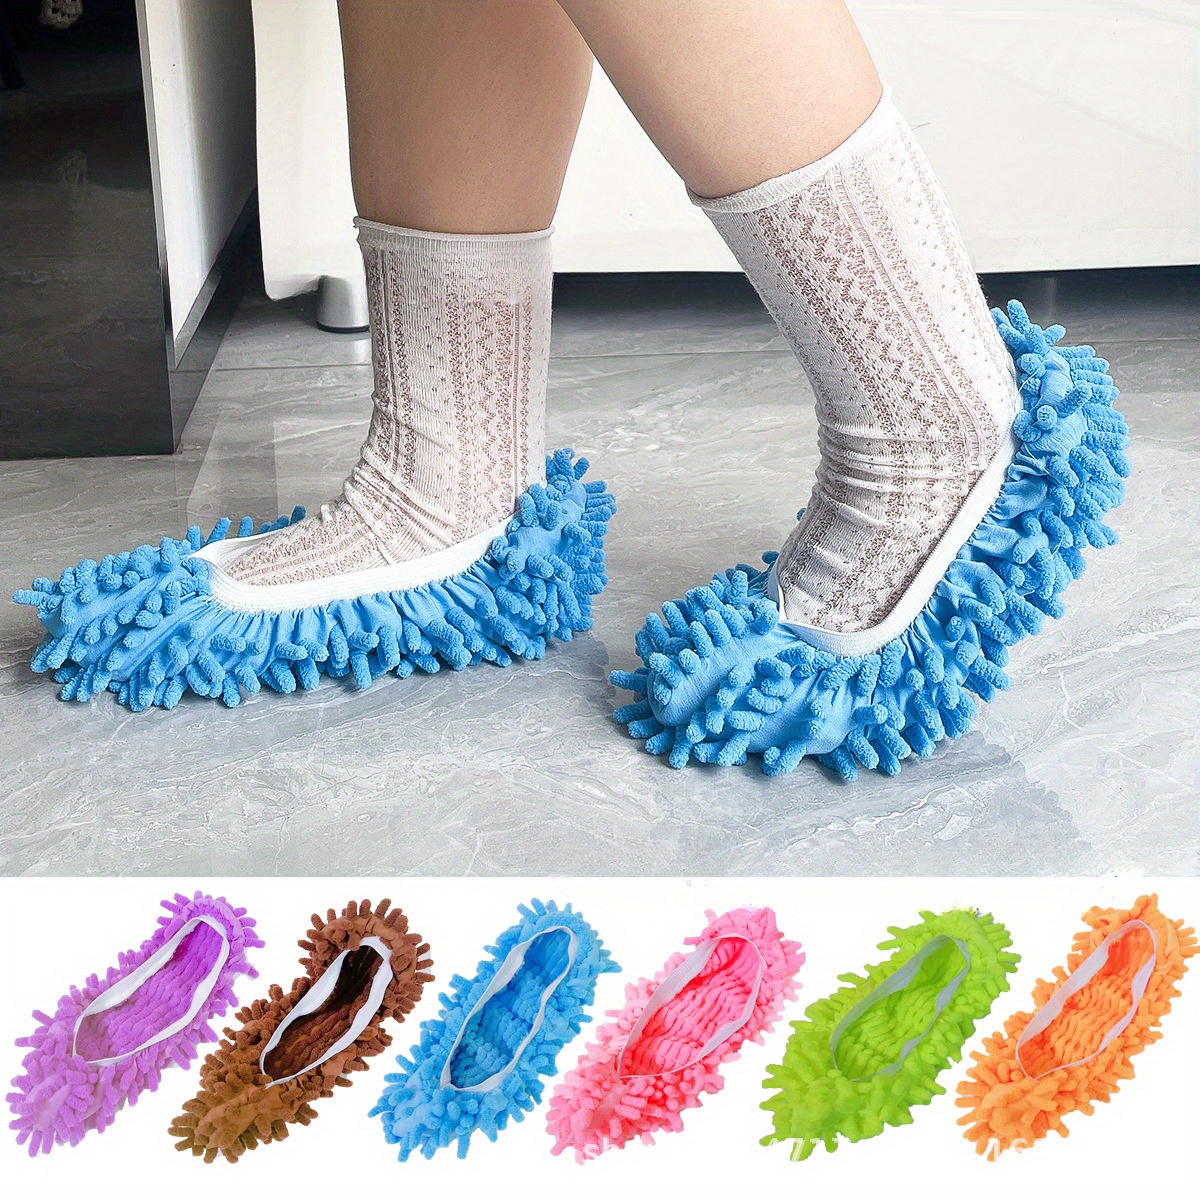 

2pcs Removable And Washable Slipper Covers, Household Floor Cleaning Shoe Covers, Sweeping Mop Covers